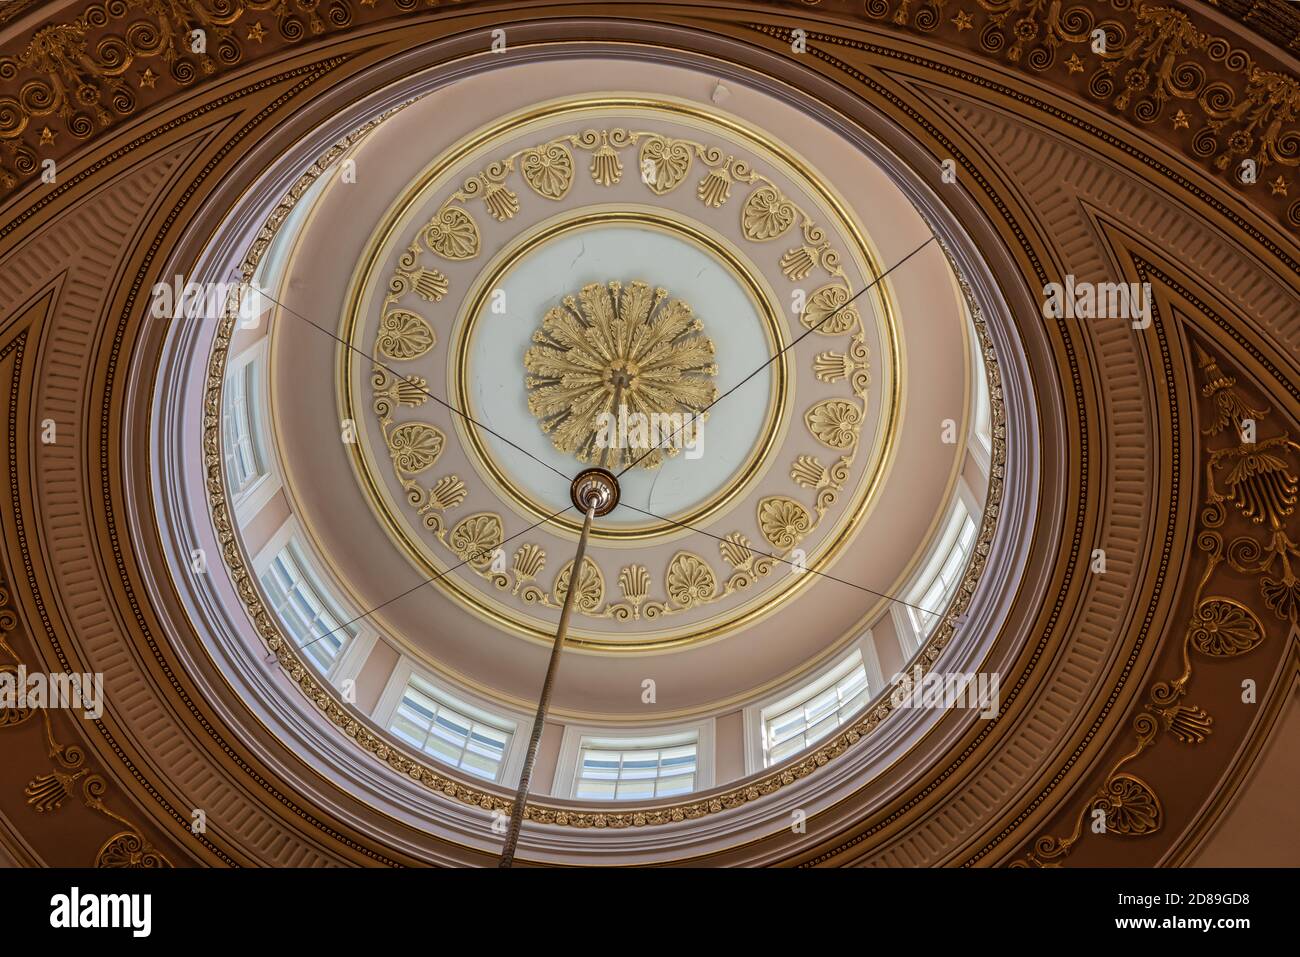 The lantern and highly ornate double-sunk coffered ceiling of the National Statuary Hall in the US Capitol Building Stock Photo